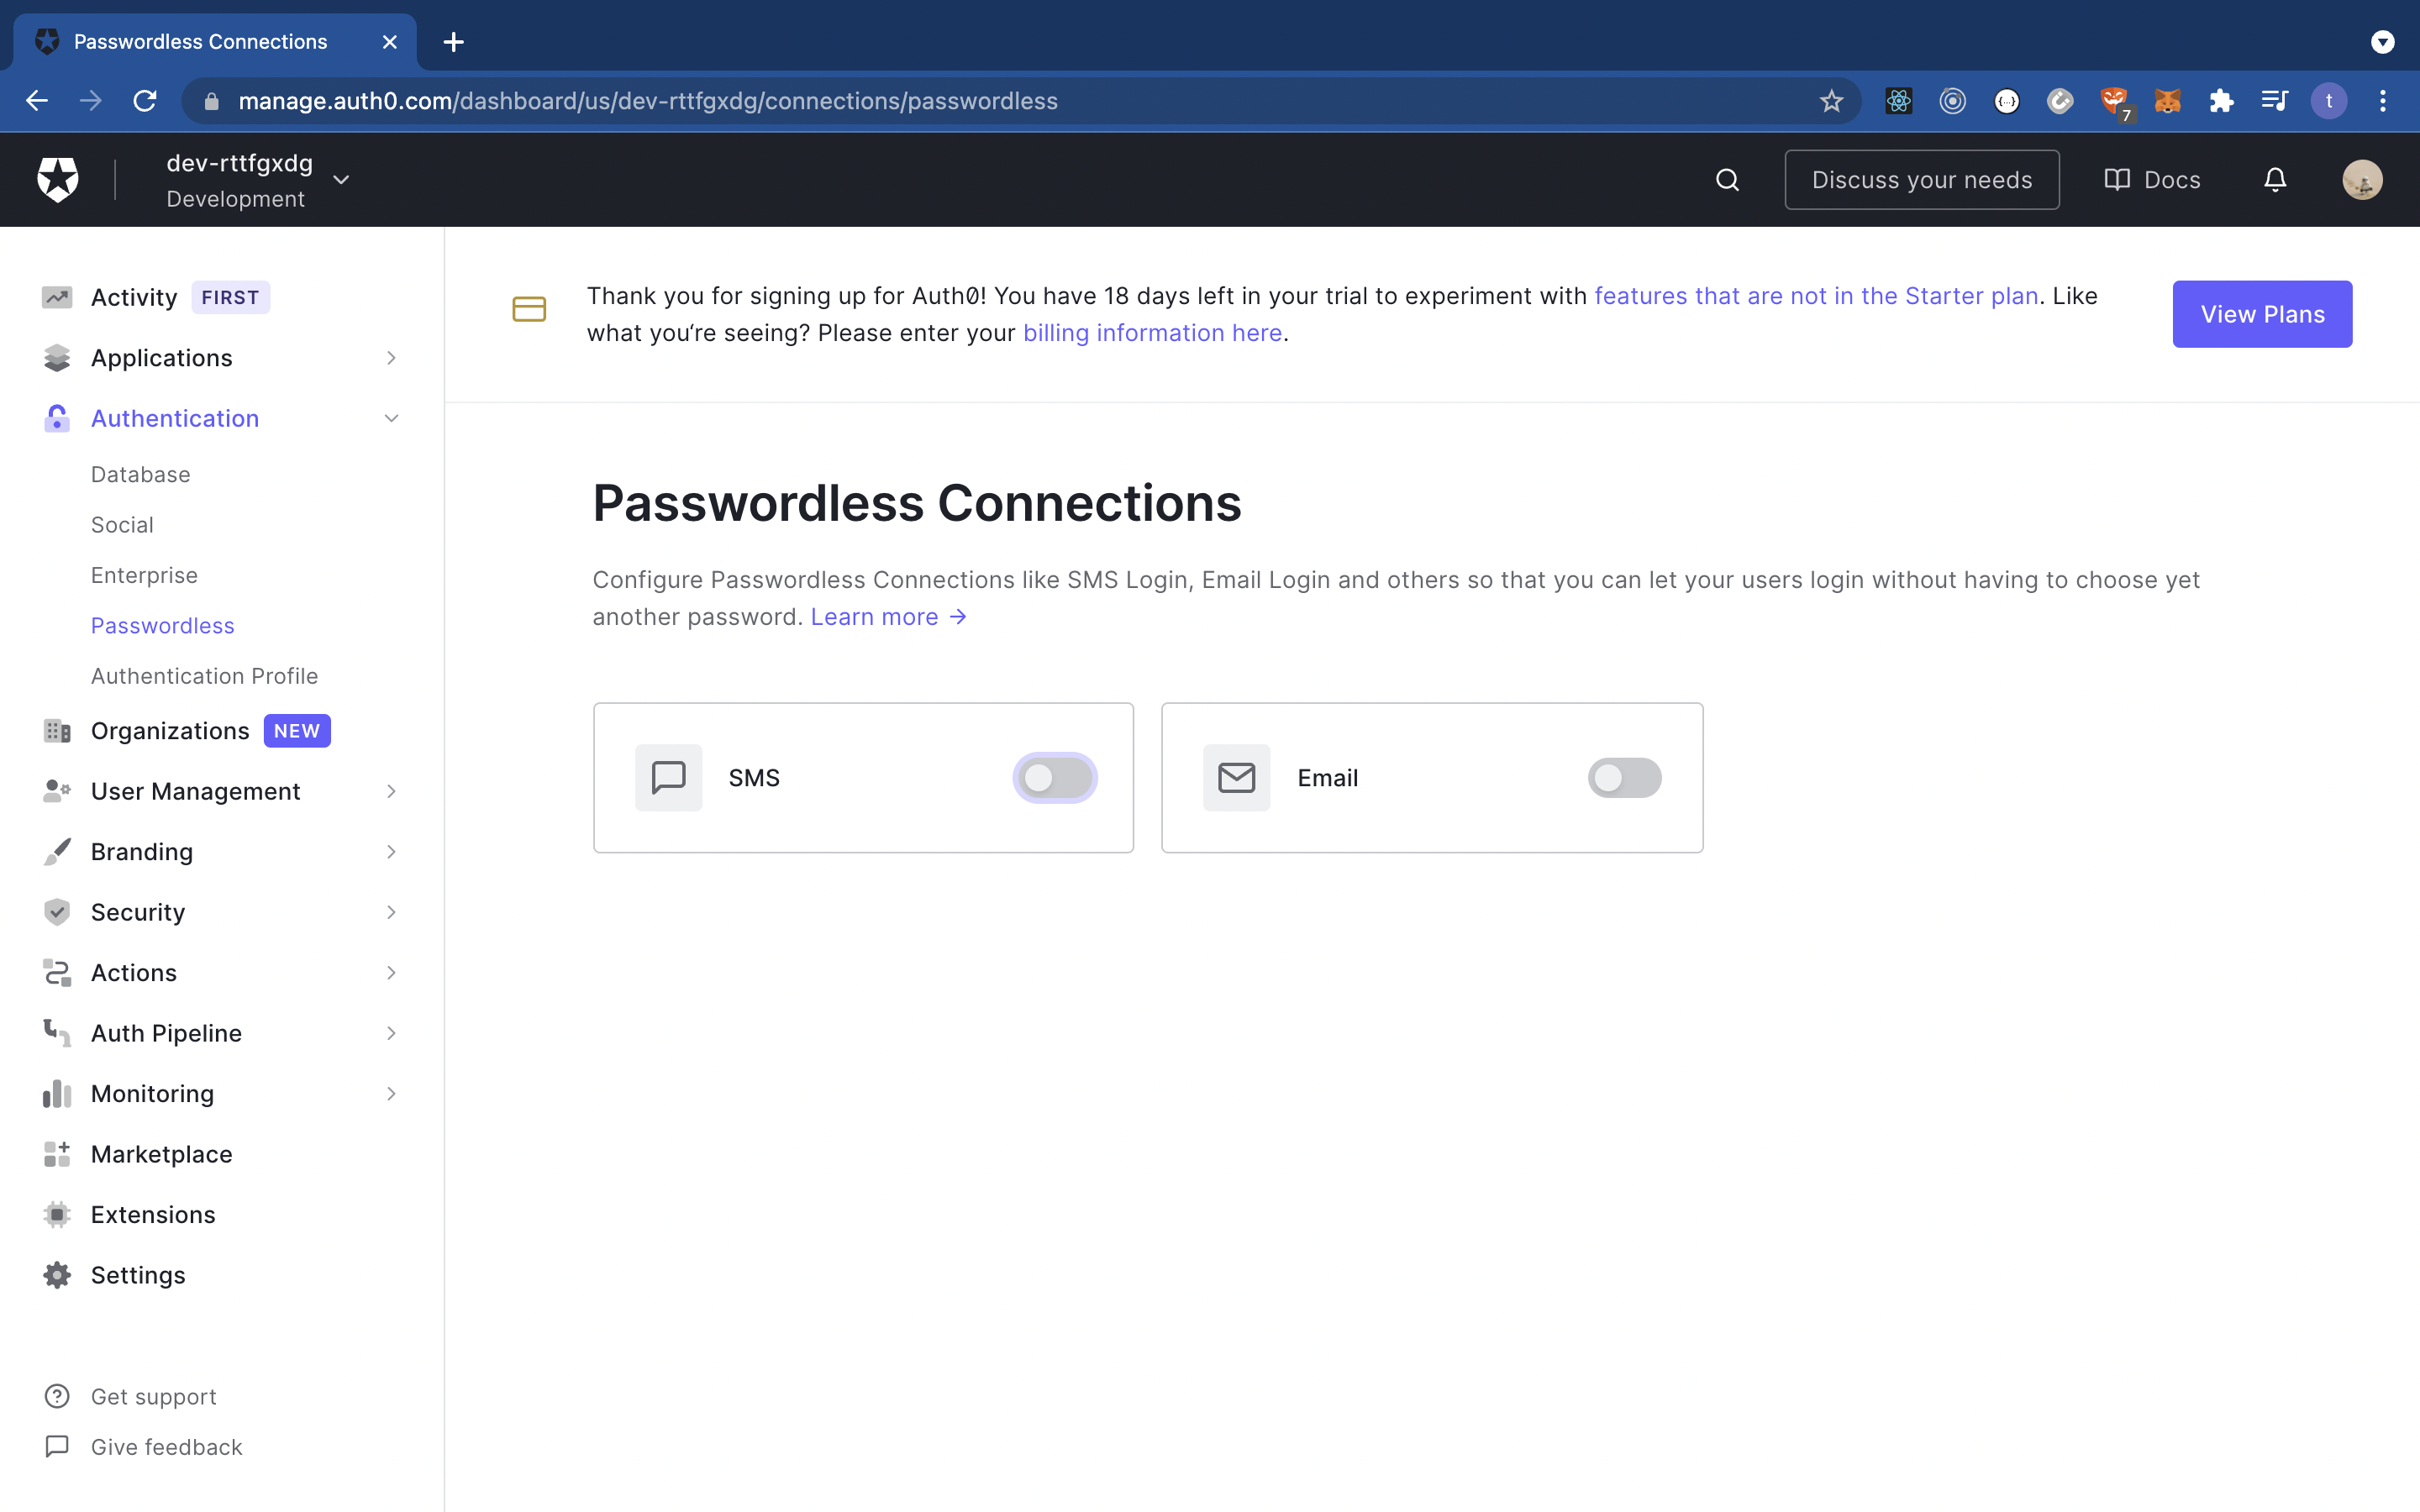 A screenshot of the Auth0 application Passwordless Connections settings tab, allowing users to enable SMS or Email as an option.